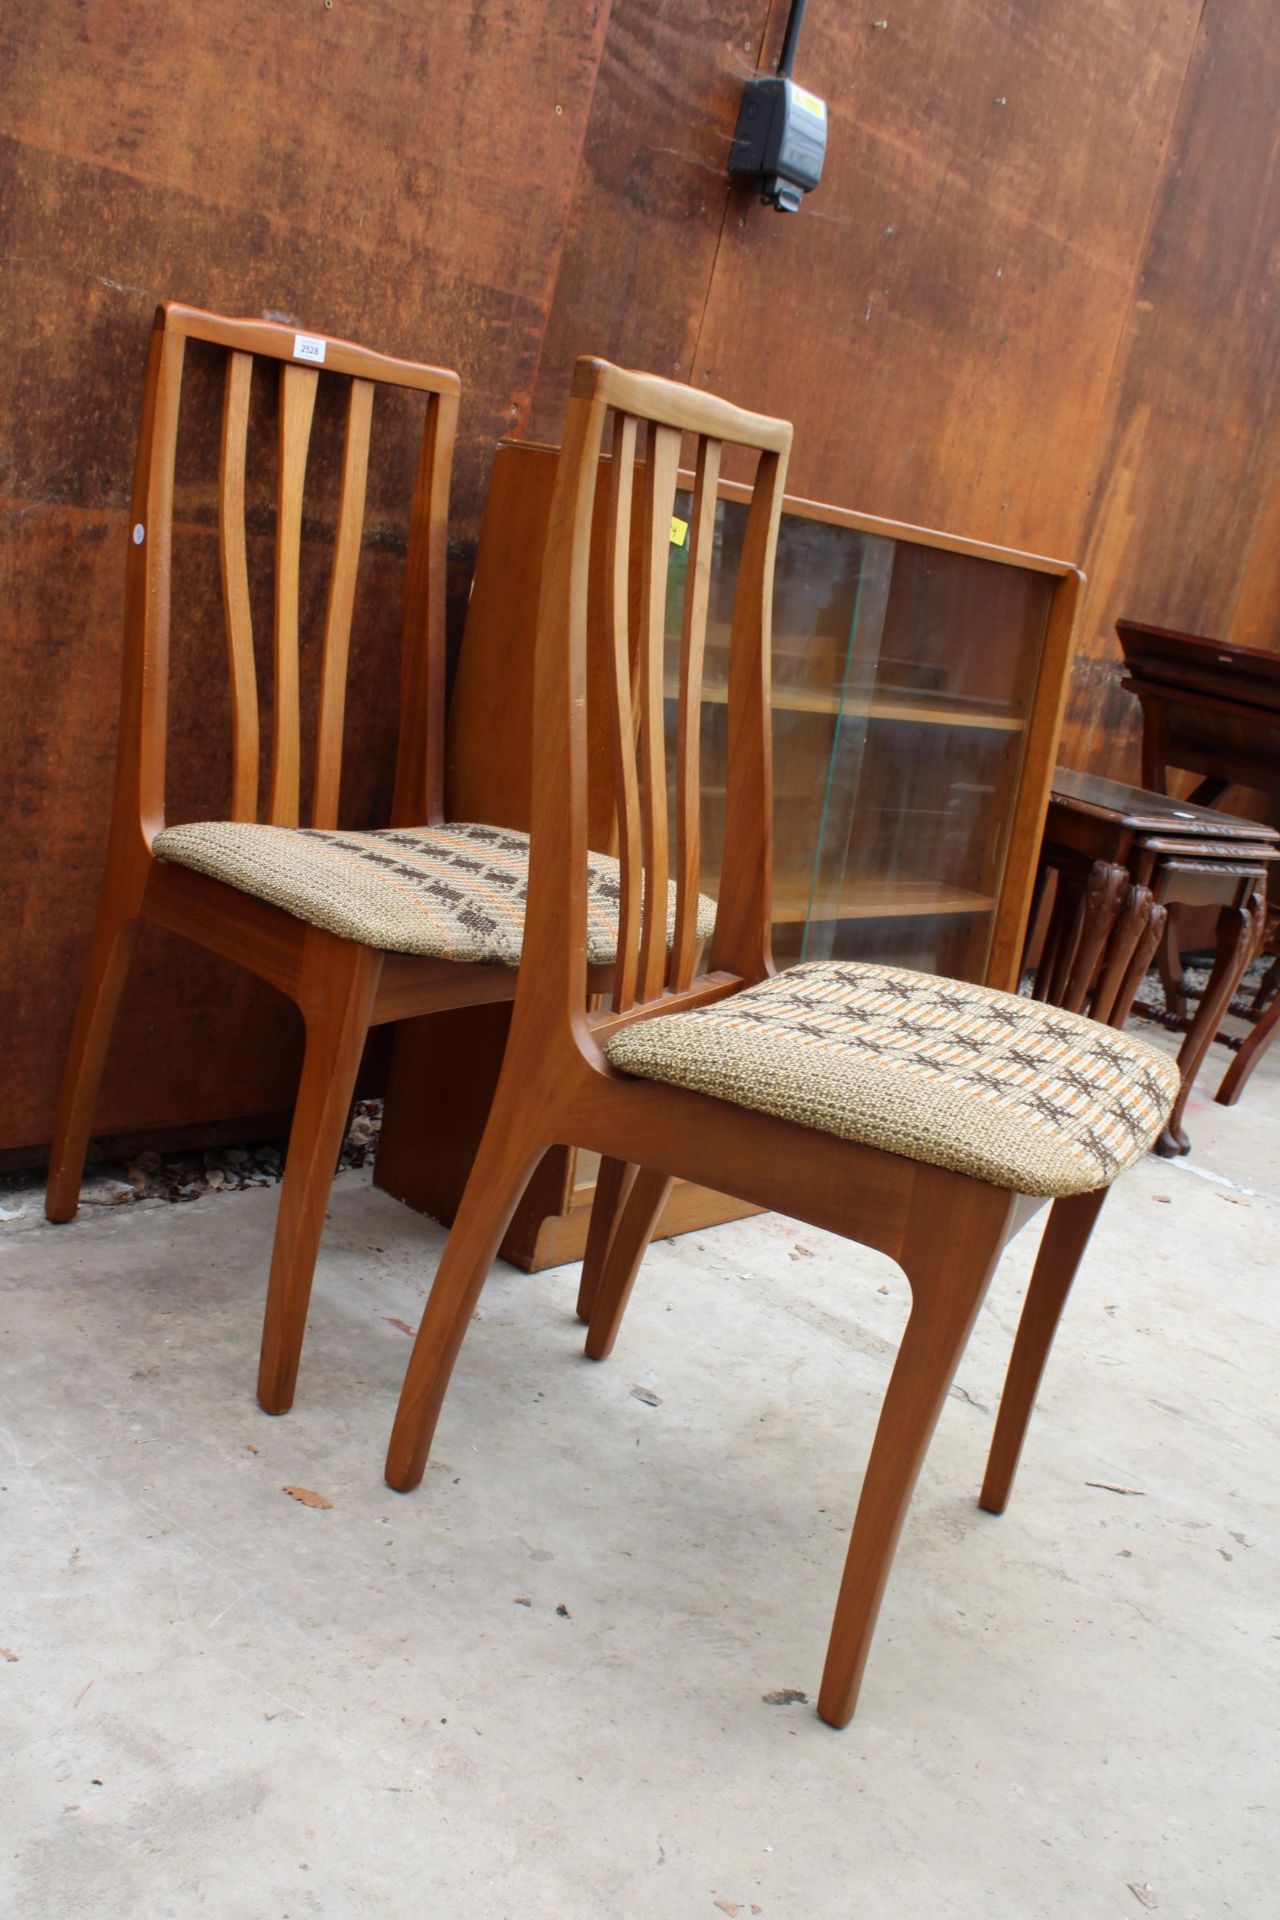 A PAIR OF RETRO TEAK DINING CHAIRS - Image 2 of 2